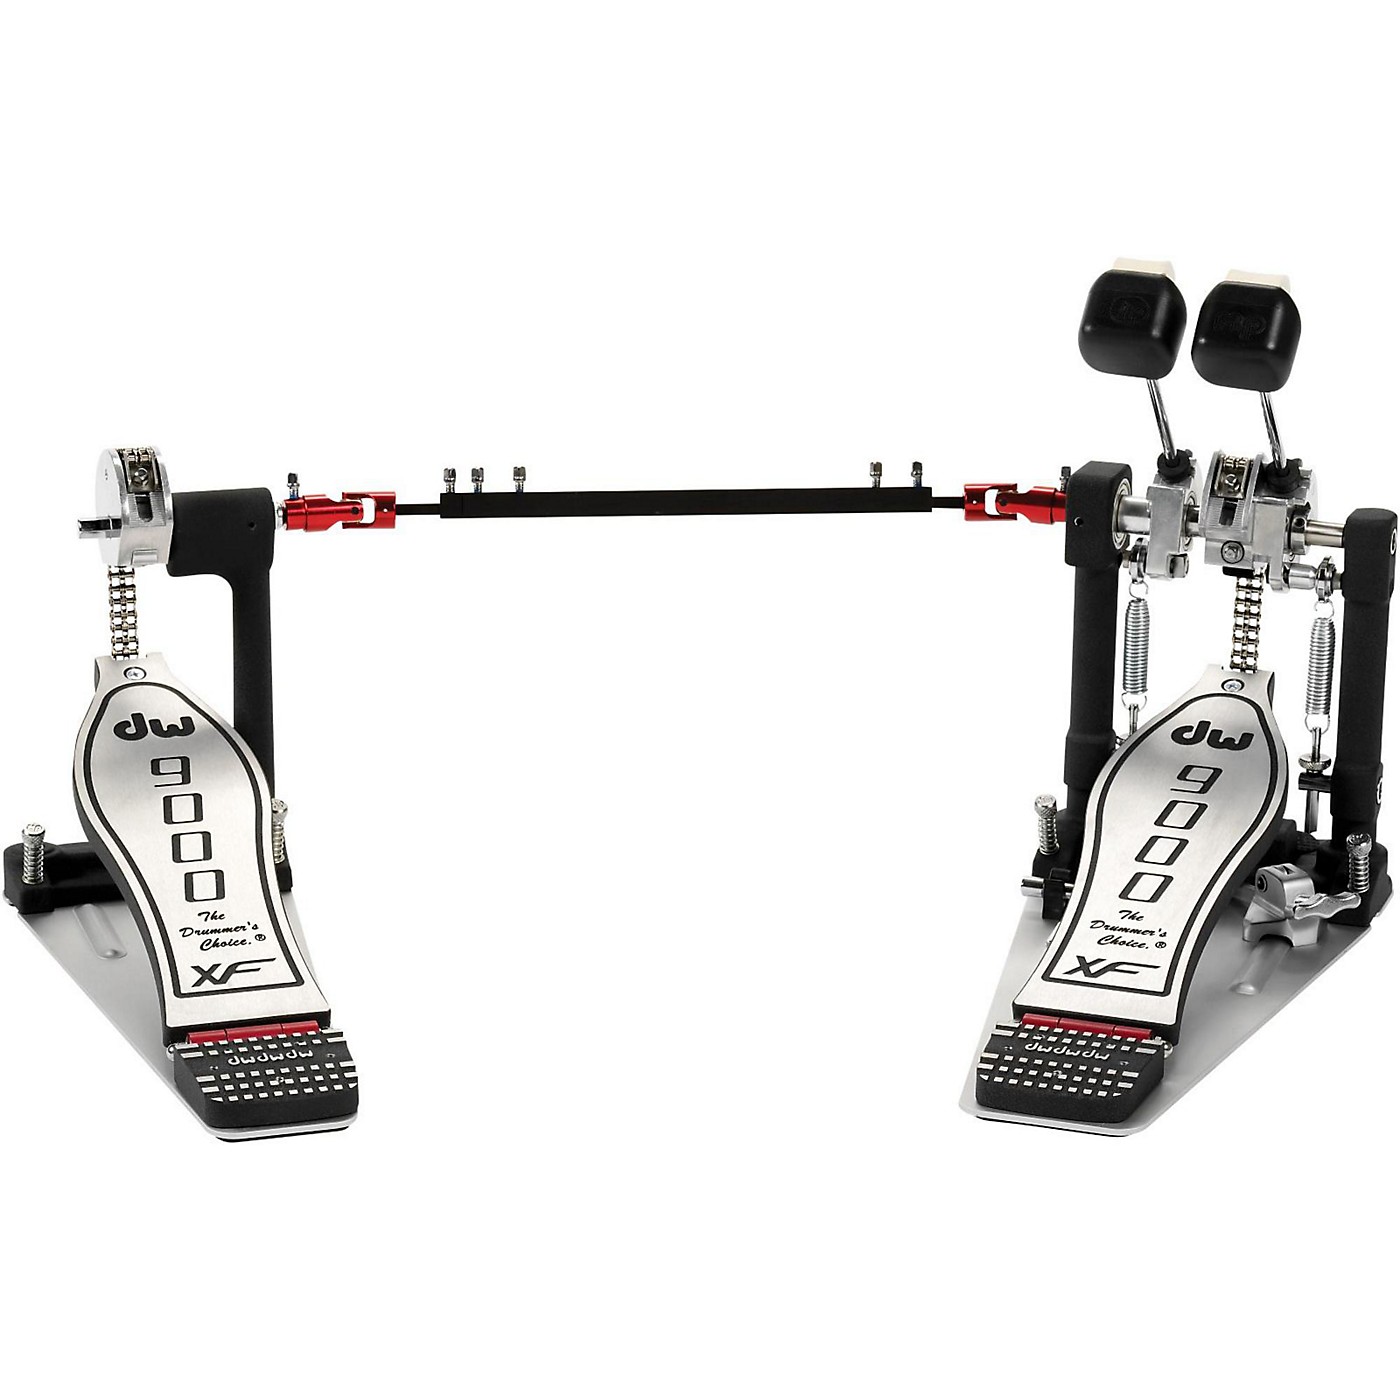 DW 9000 Series Double Bass Drum Pedal With eXtended Footboard thumbnail